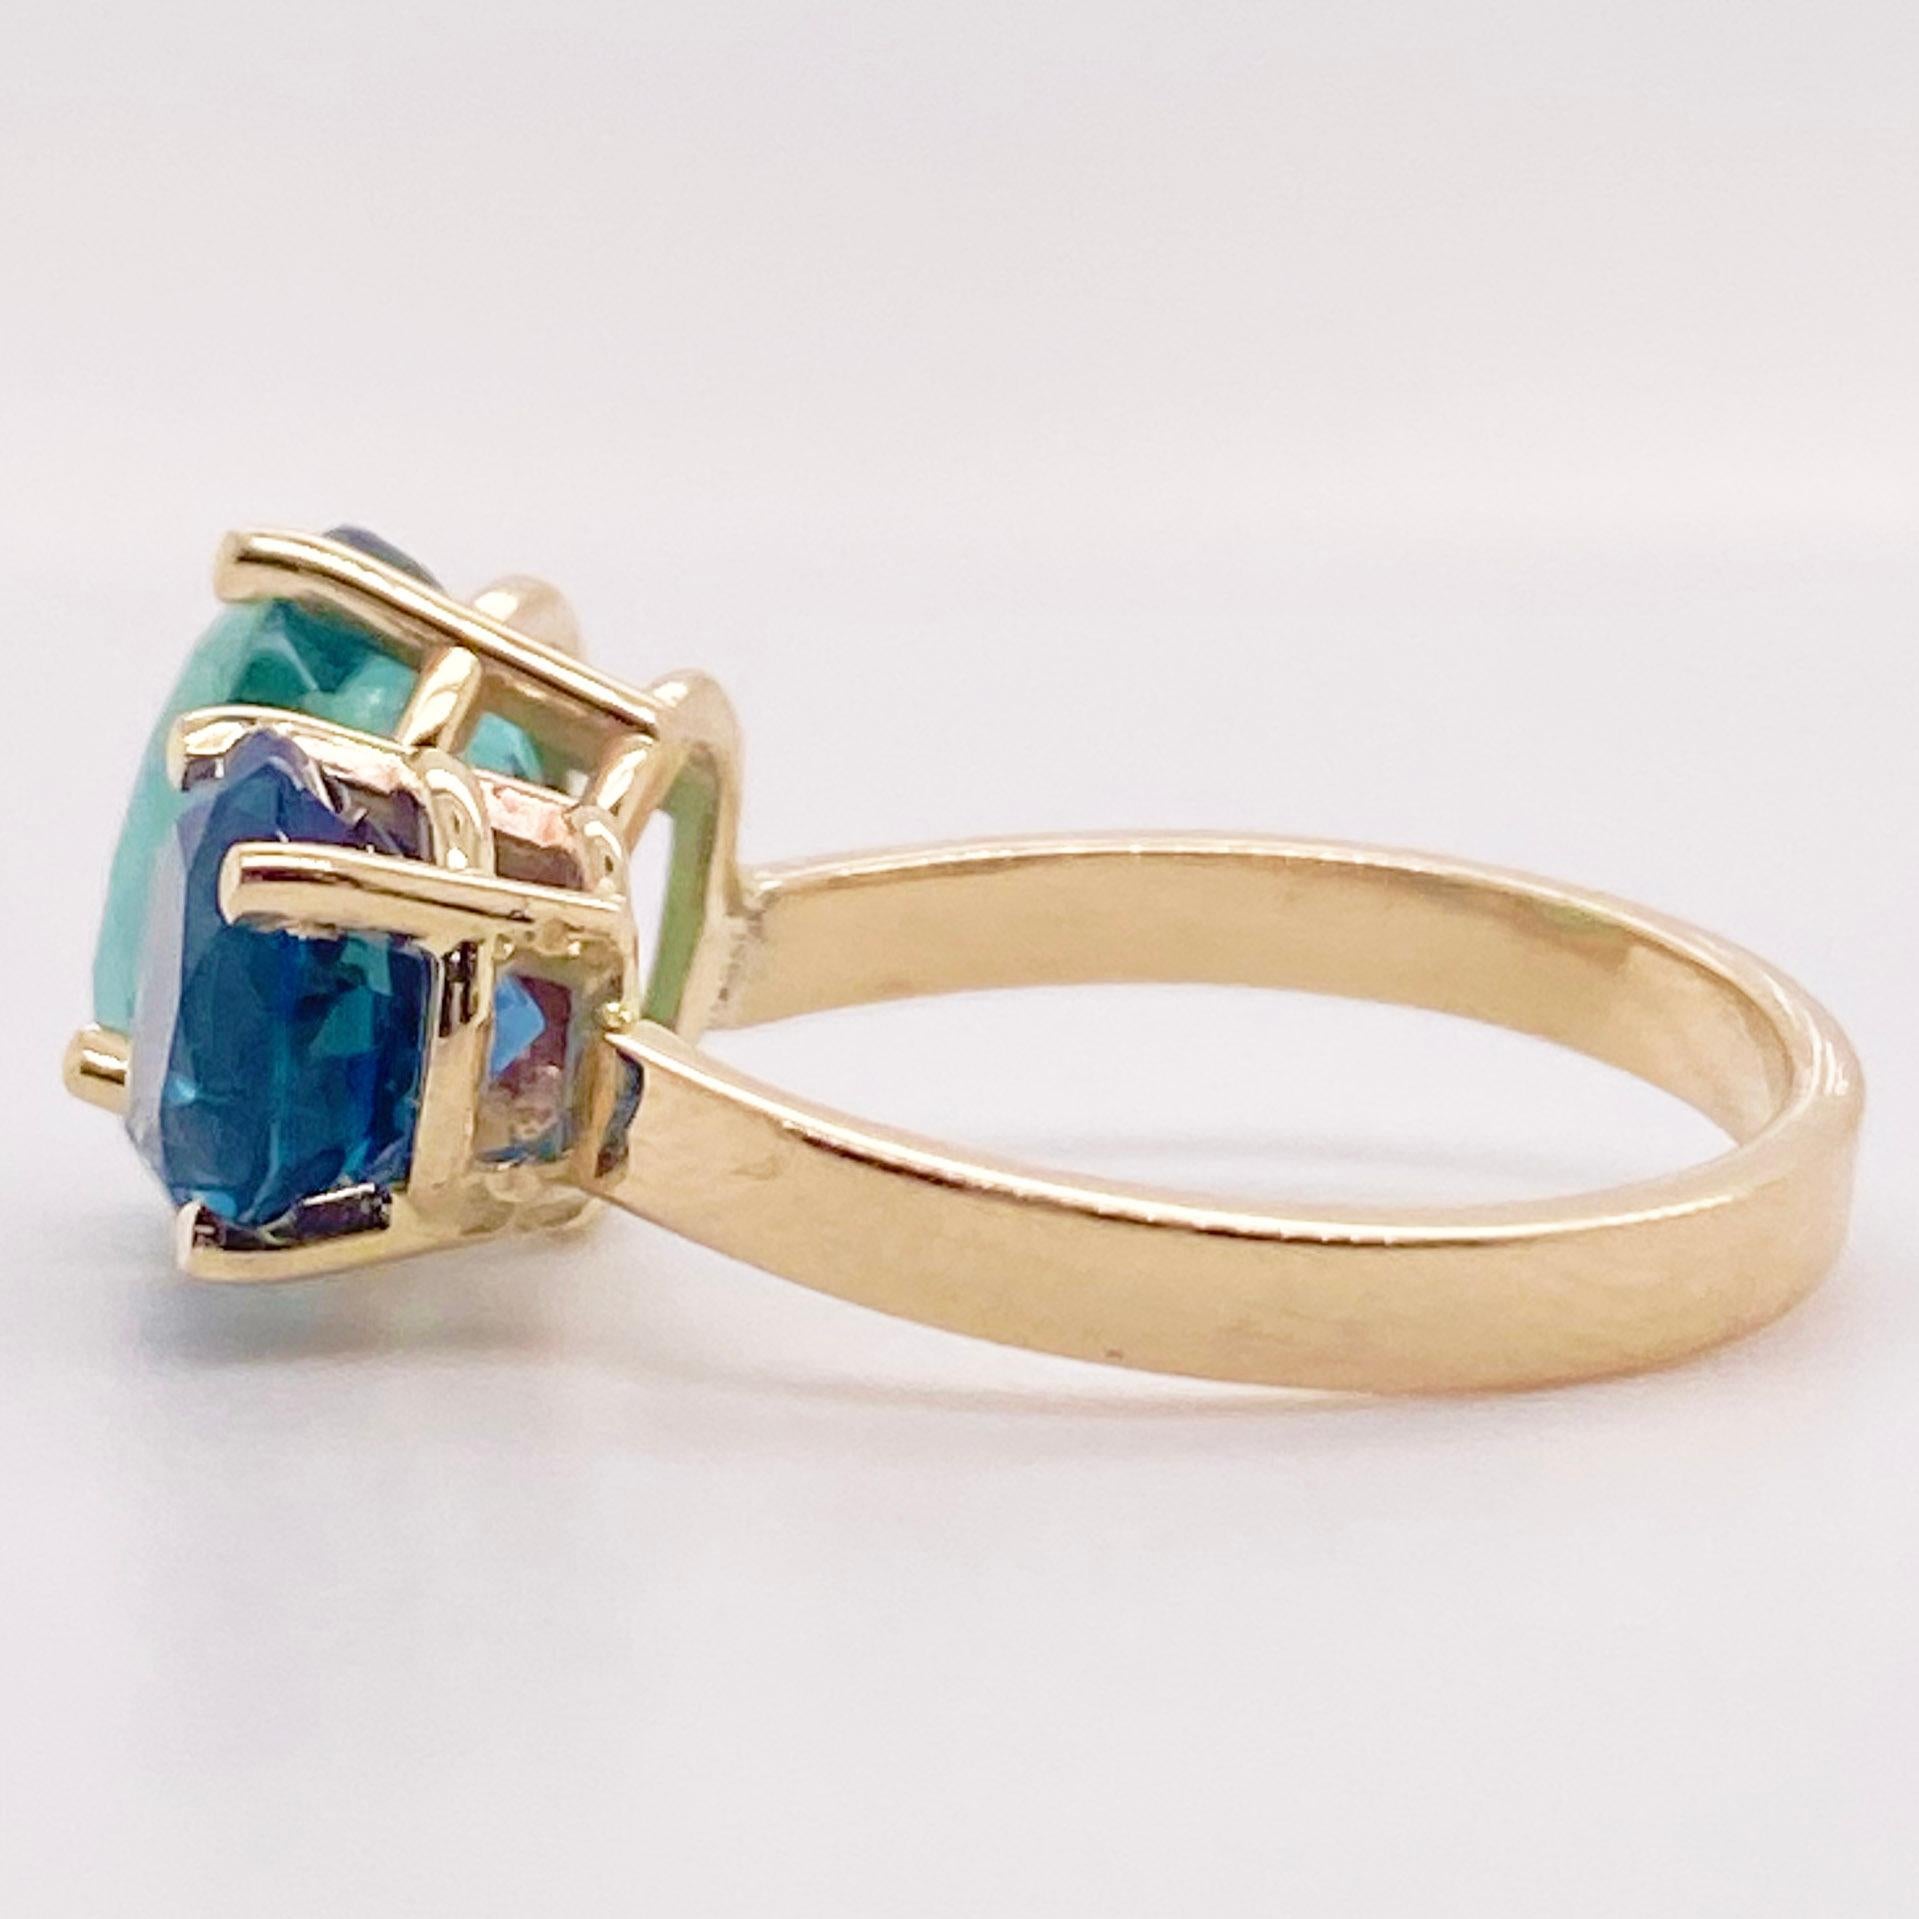 This two stone ring has natural, genuine gemstones that were hand selected by our top Gemologist. The beauty of the luscious green tourmaline that was mined in Brazil has a gorgeous, rich color. For blue gemstones, the blue zircon has the most